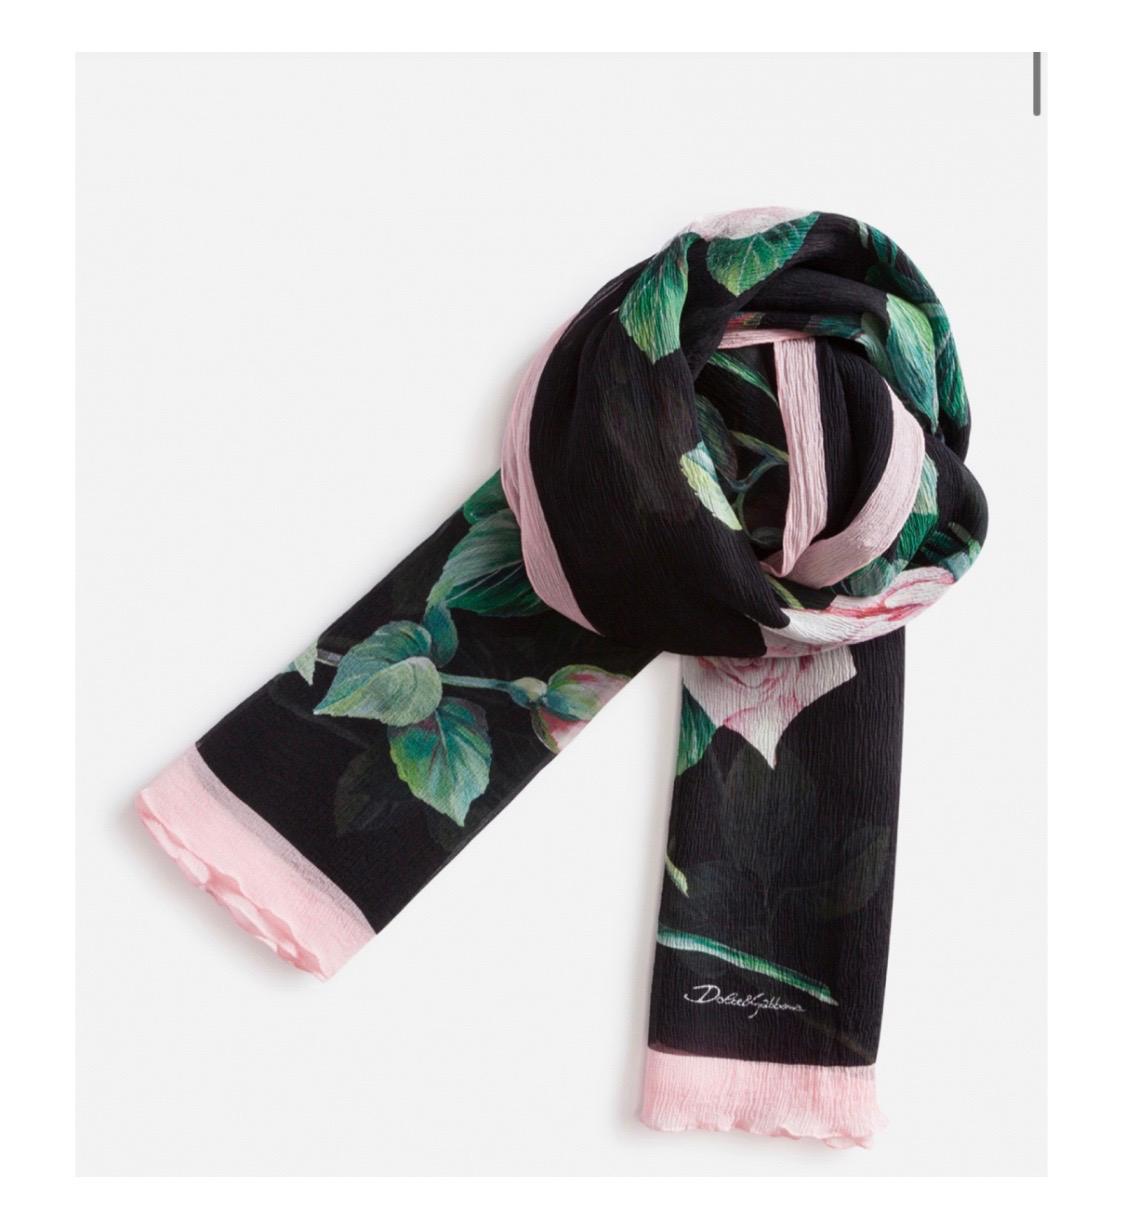 Dolce & Gabbana Black & Tropical
Rose printed silk scarf wrap swimwear pareo
 
Floral Printed

Silk

Dry clean

Made in Italy

100% Silk

Size 120x190cm large

Brand new with original tags!
Gift bag can be added on request!

Please check my other DG